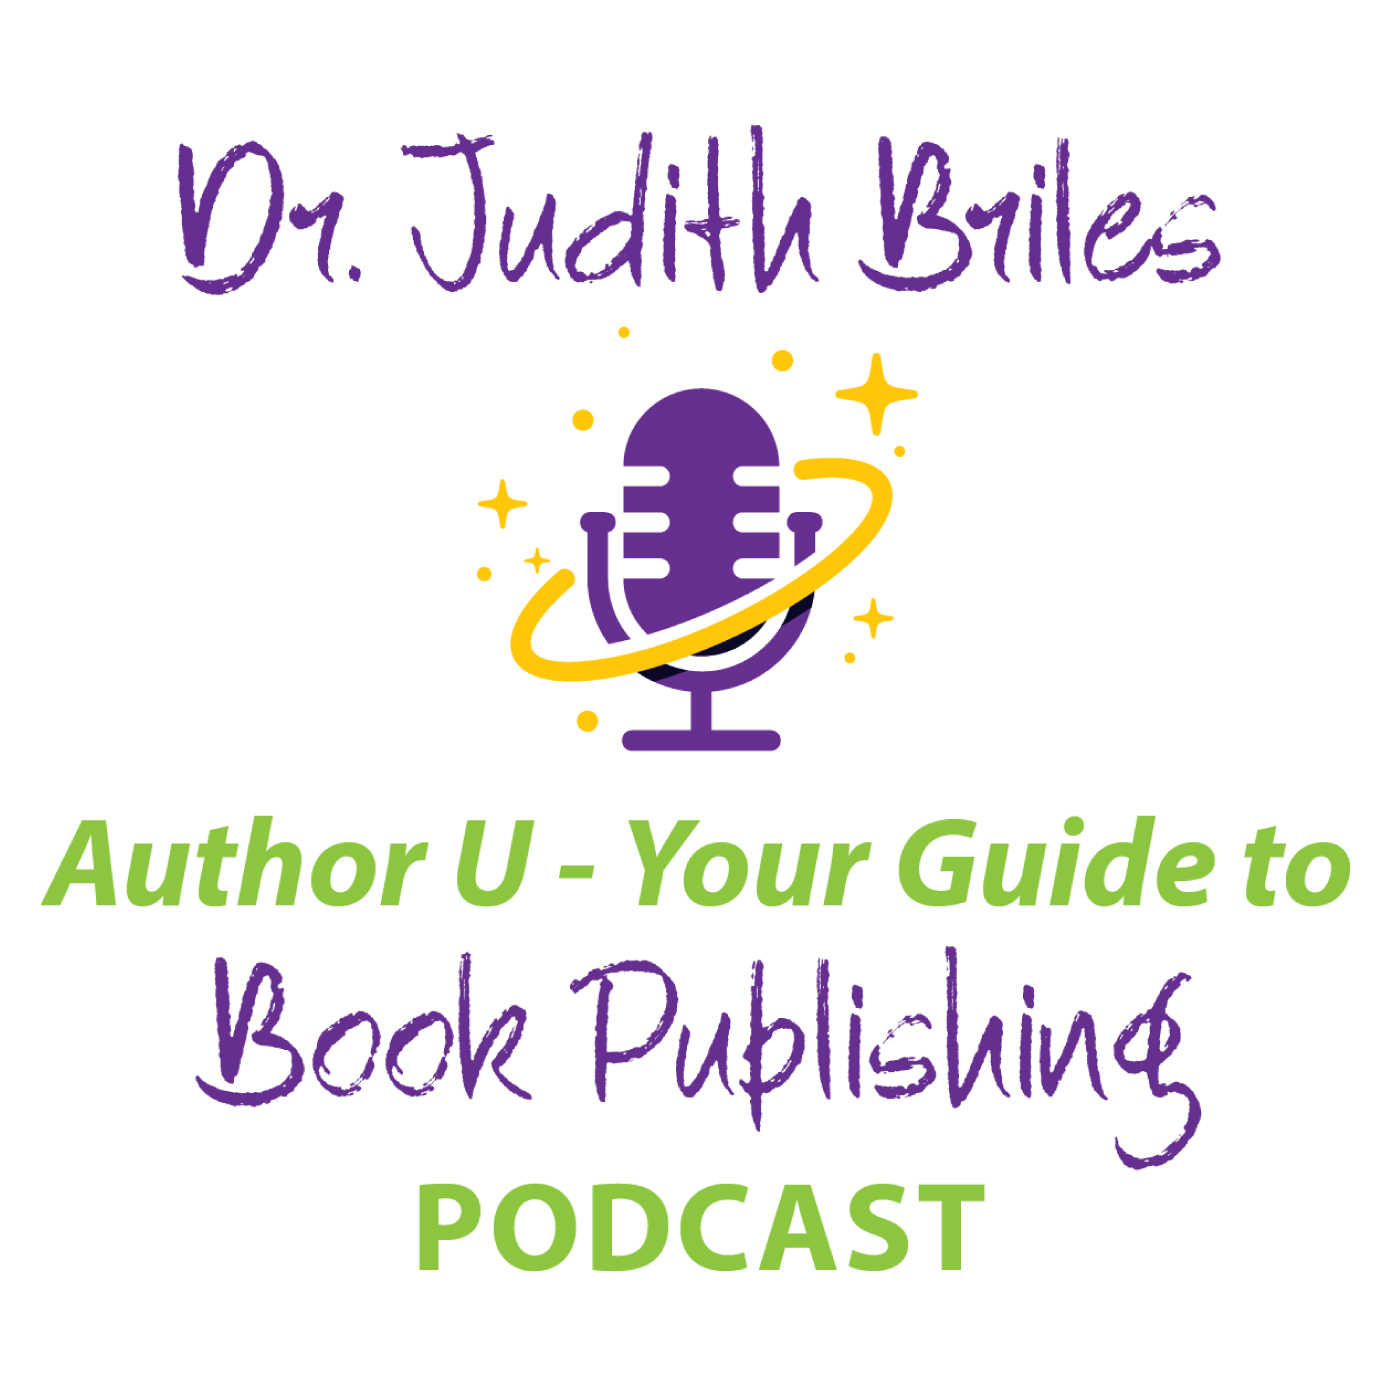 Author U Your Guide to Book Publishing